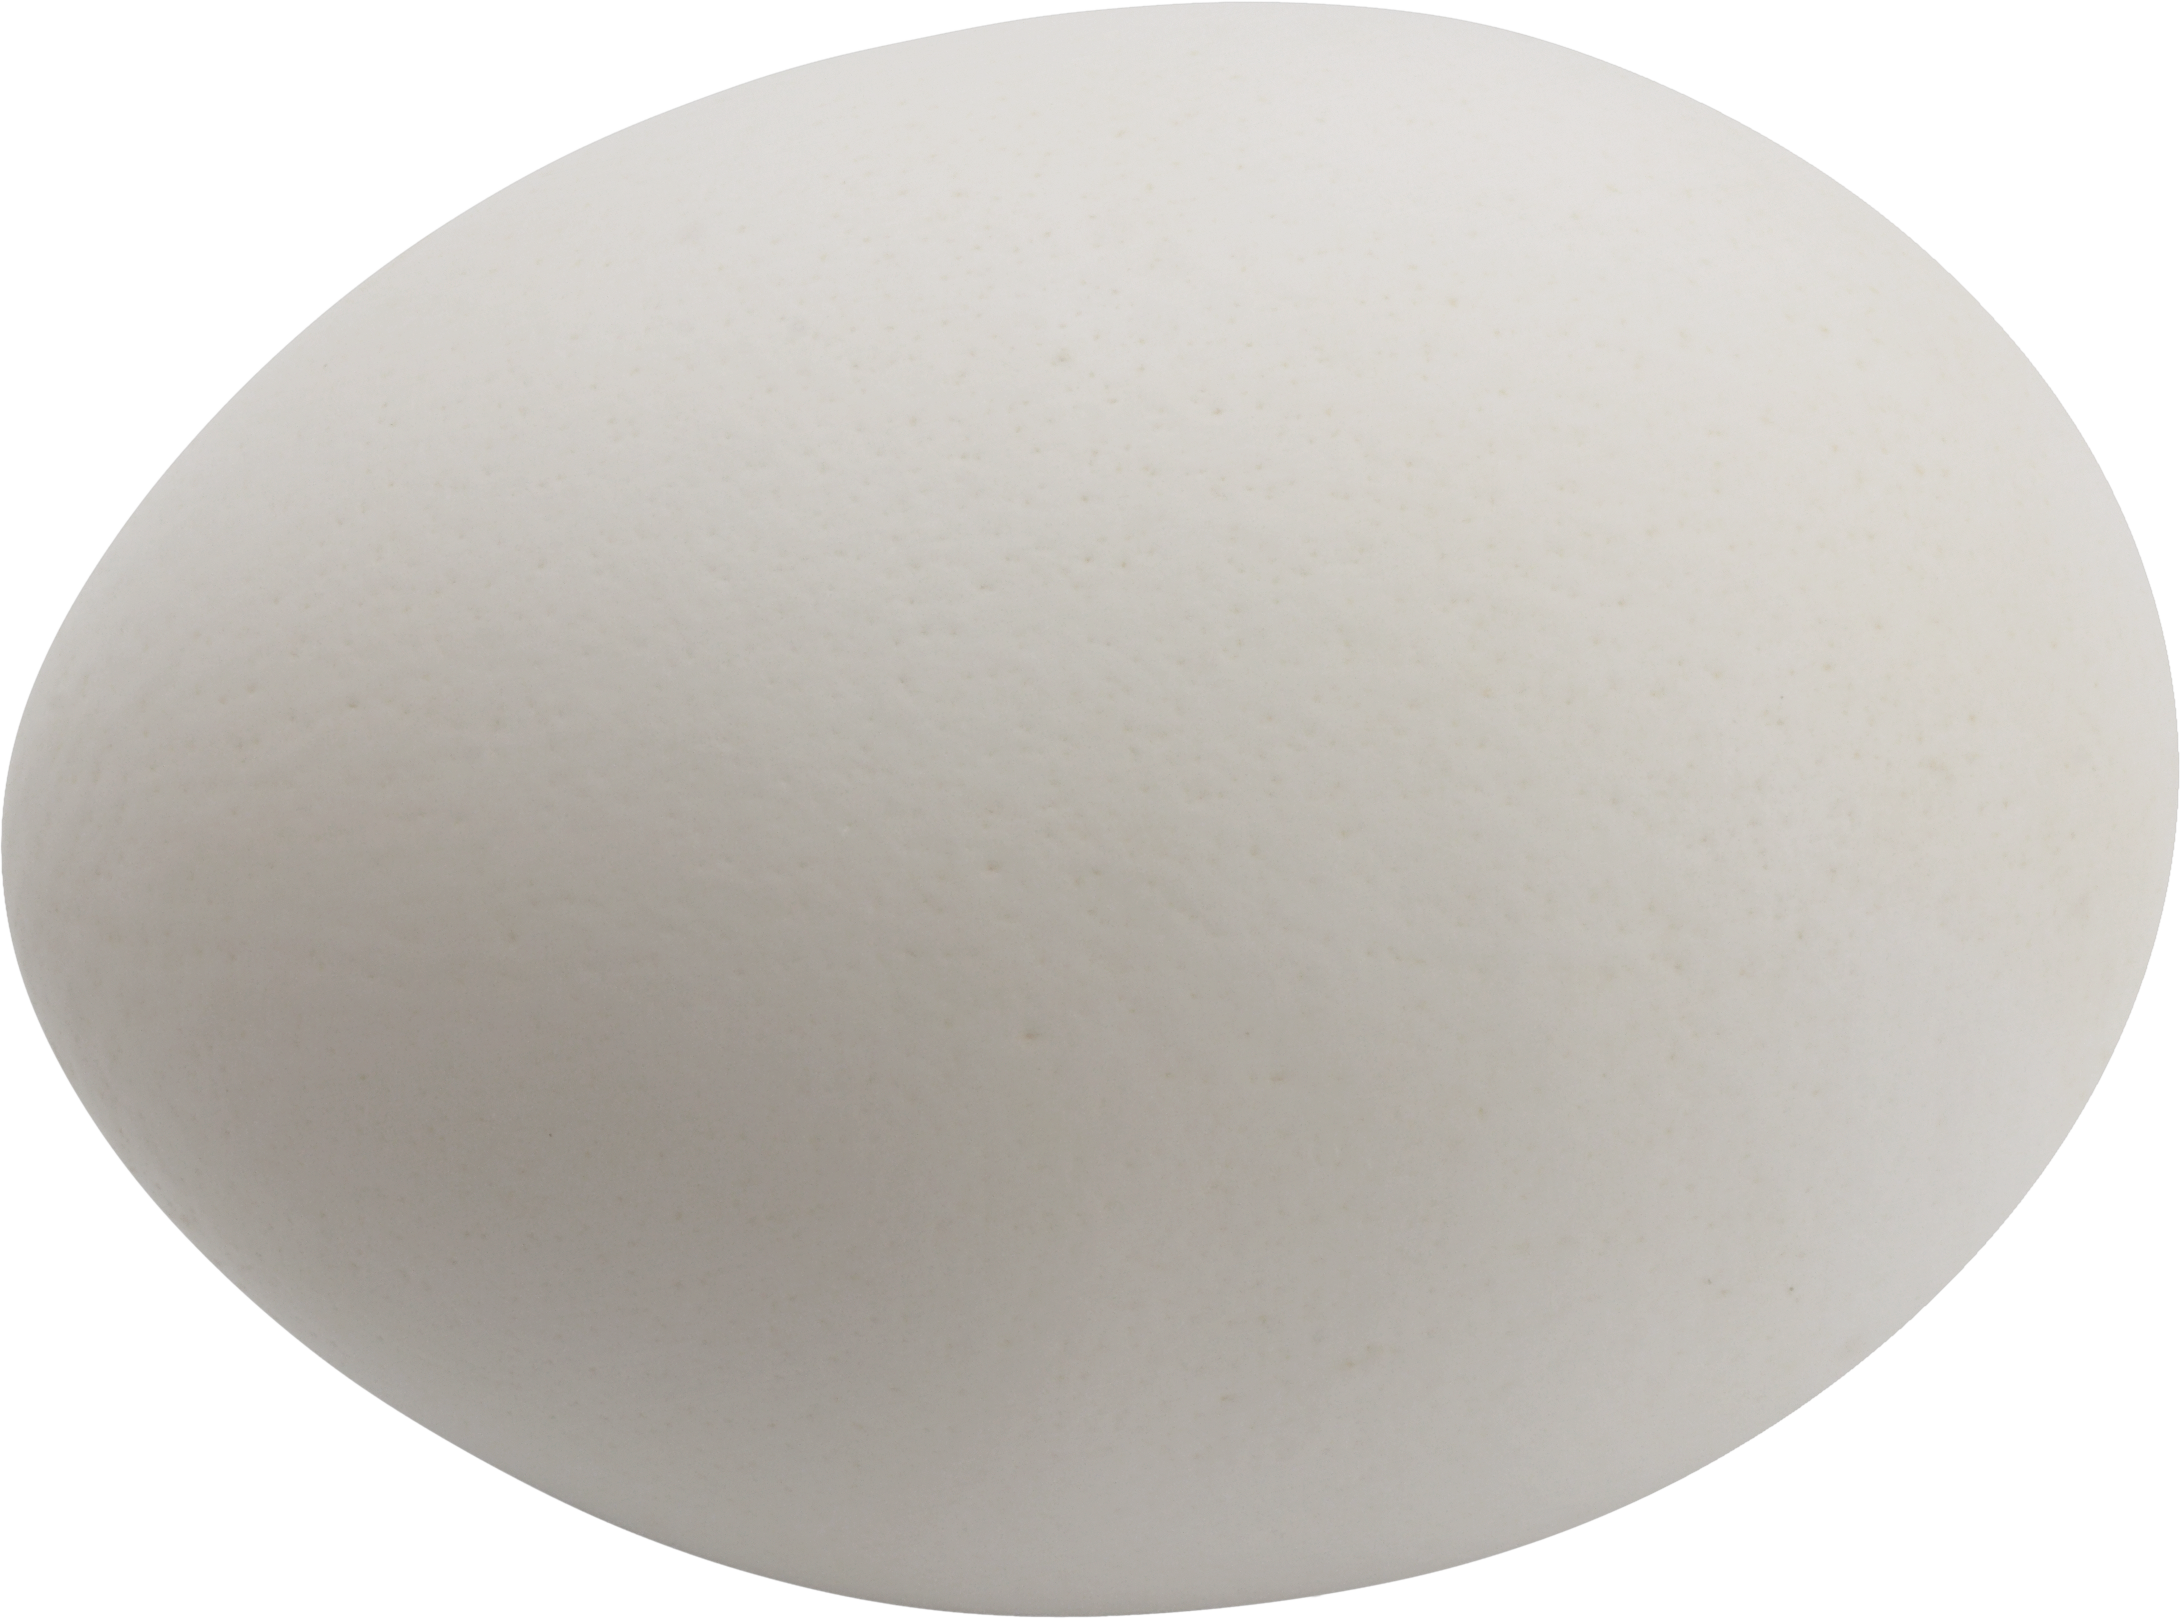 Egg three isolated stock. Eggs clipart transparent background